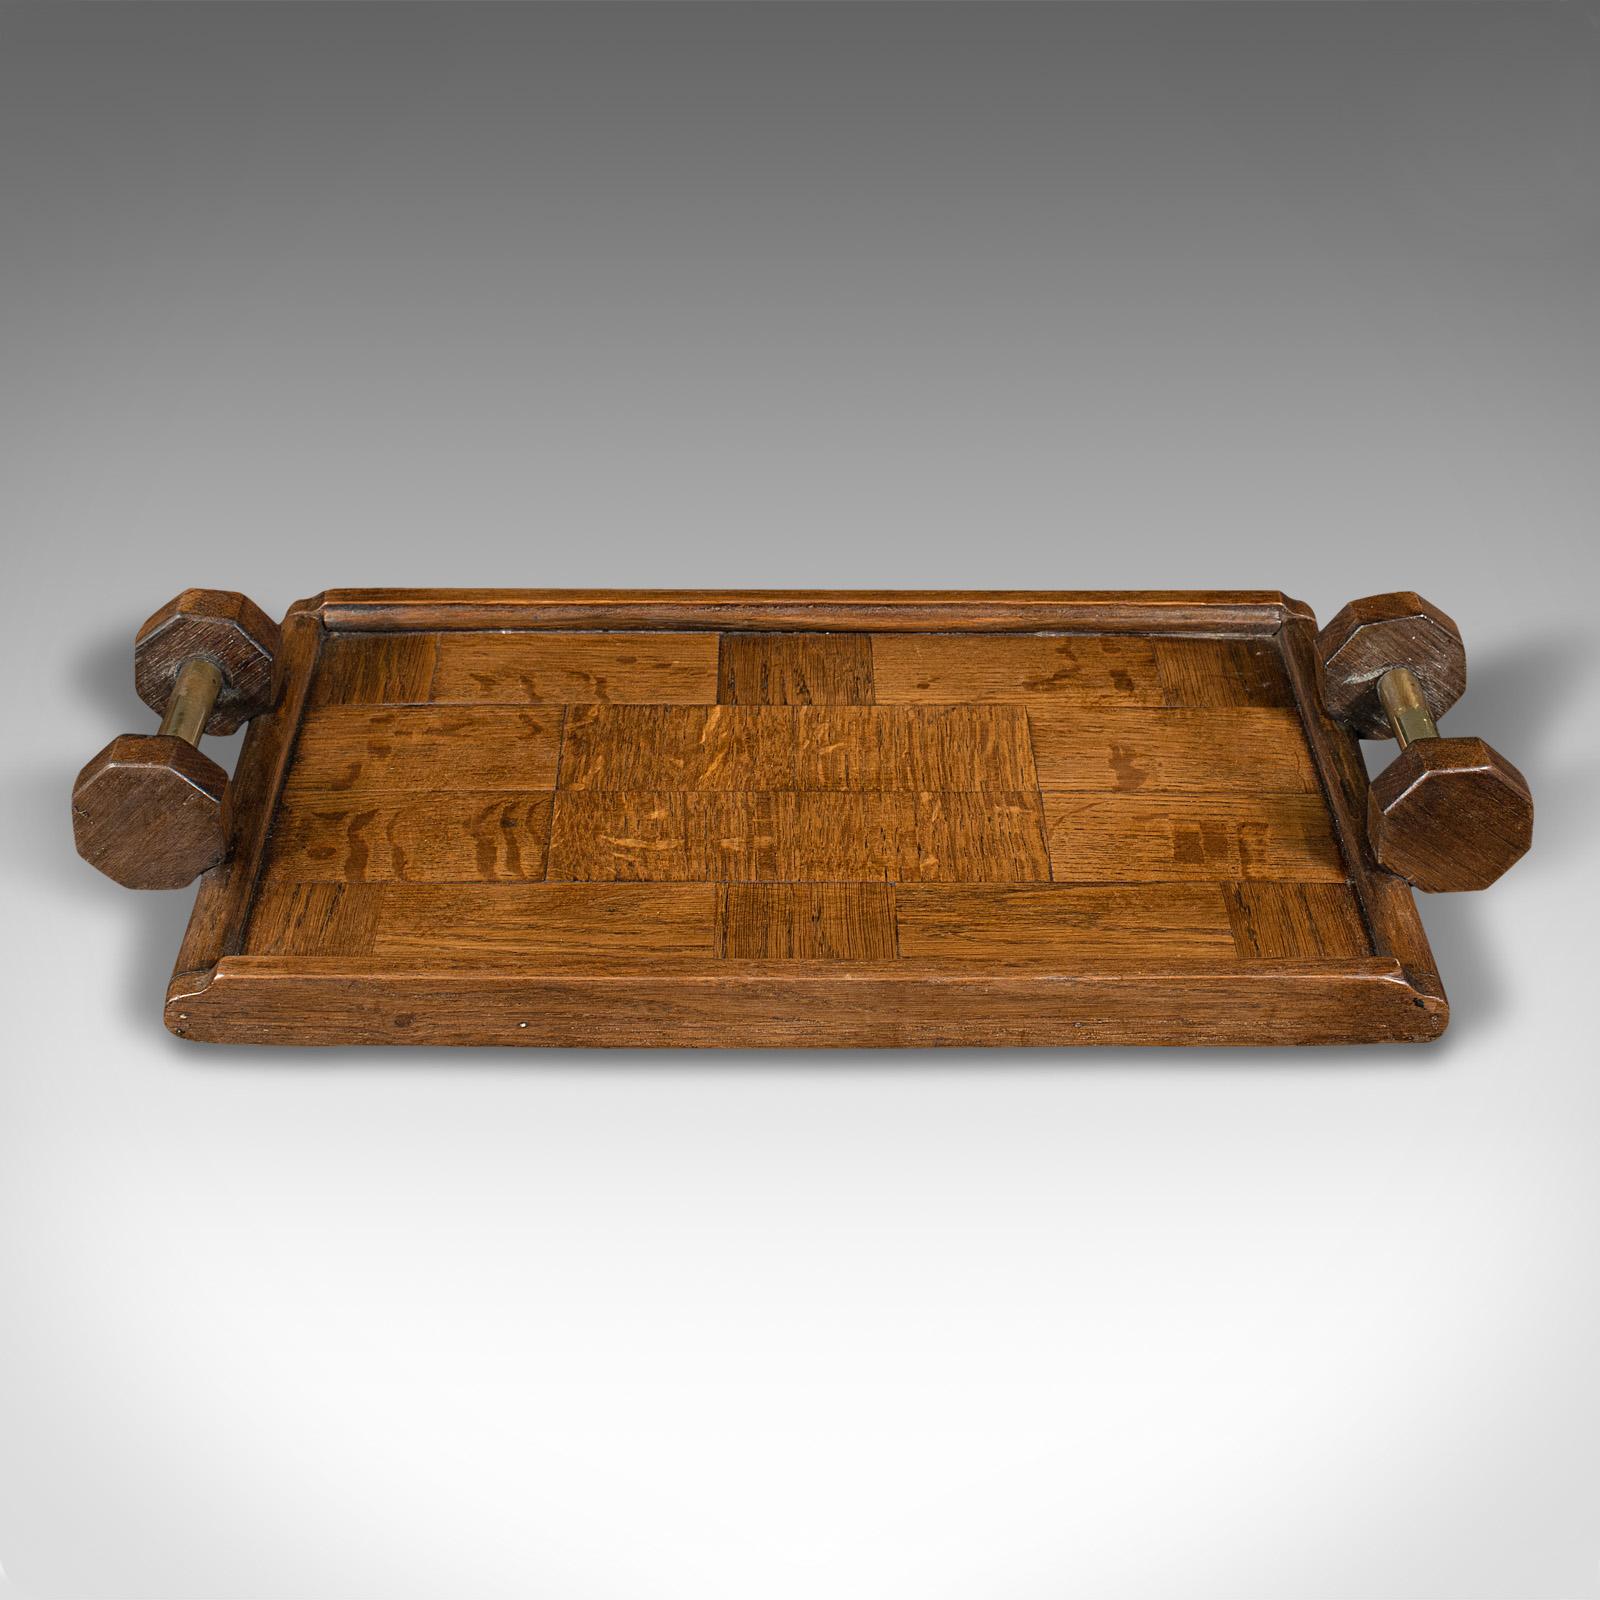 This is an antique ship's concierge tray. An English, oak maritime butler's slide, dating to the Edwardian period, circa 1910.

Distinctive form with appealing parquetry finish
Displaying a desirable aged patina and in good order
Select oak